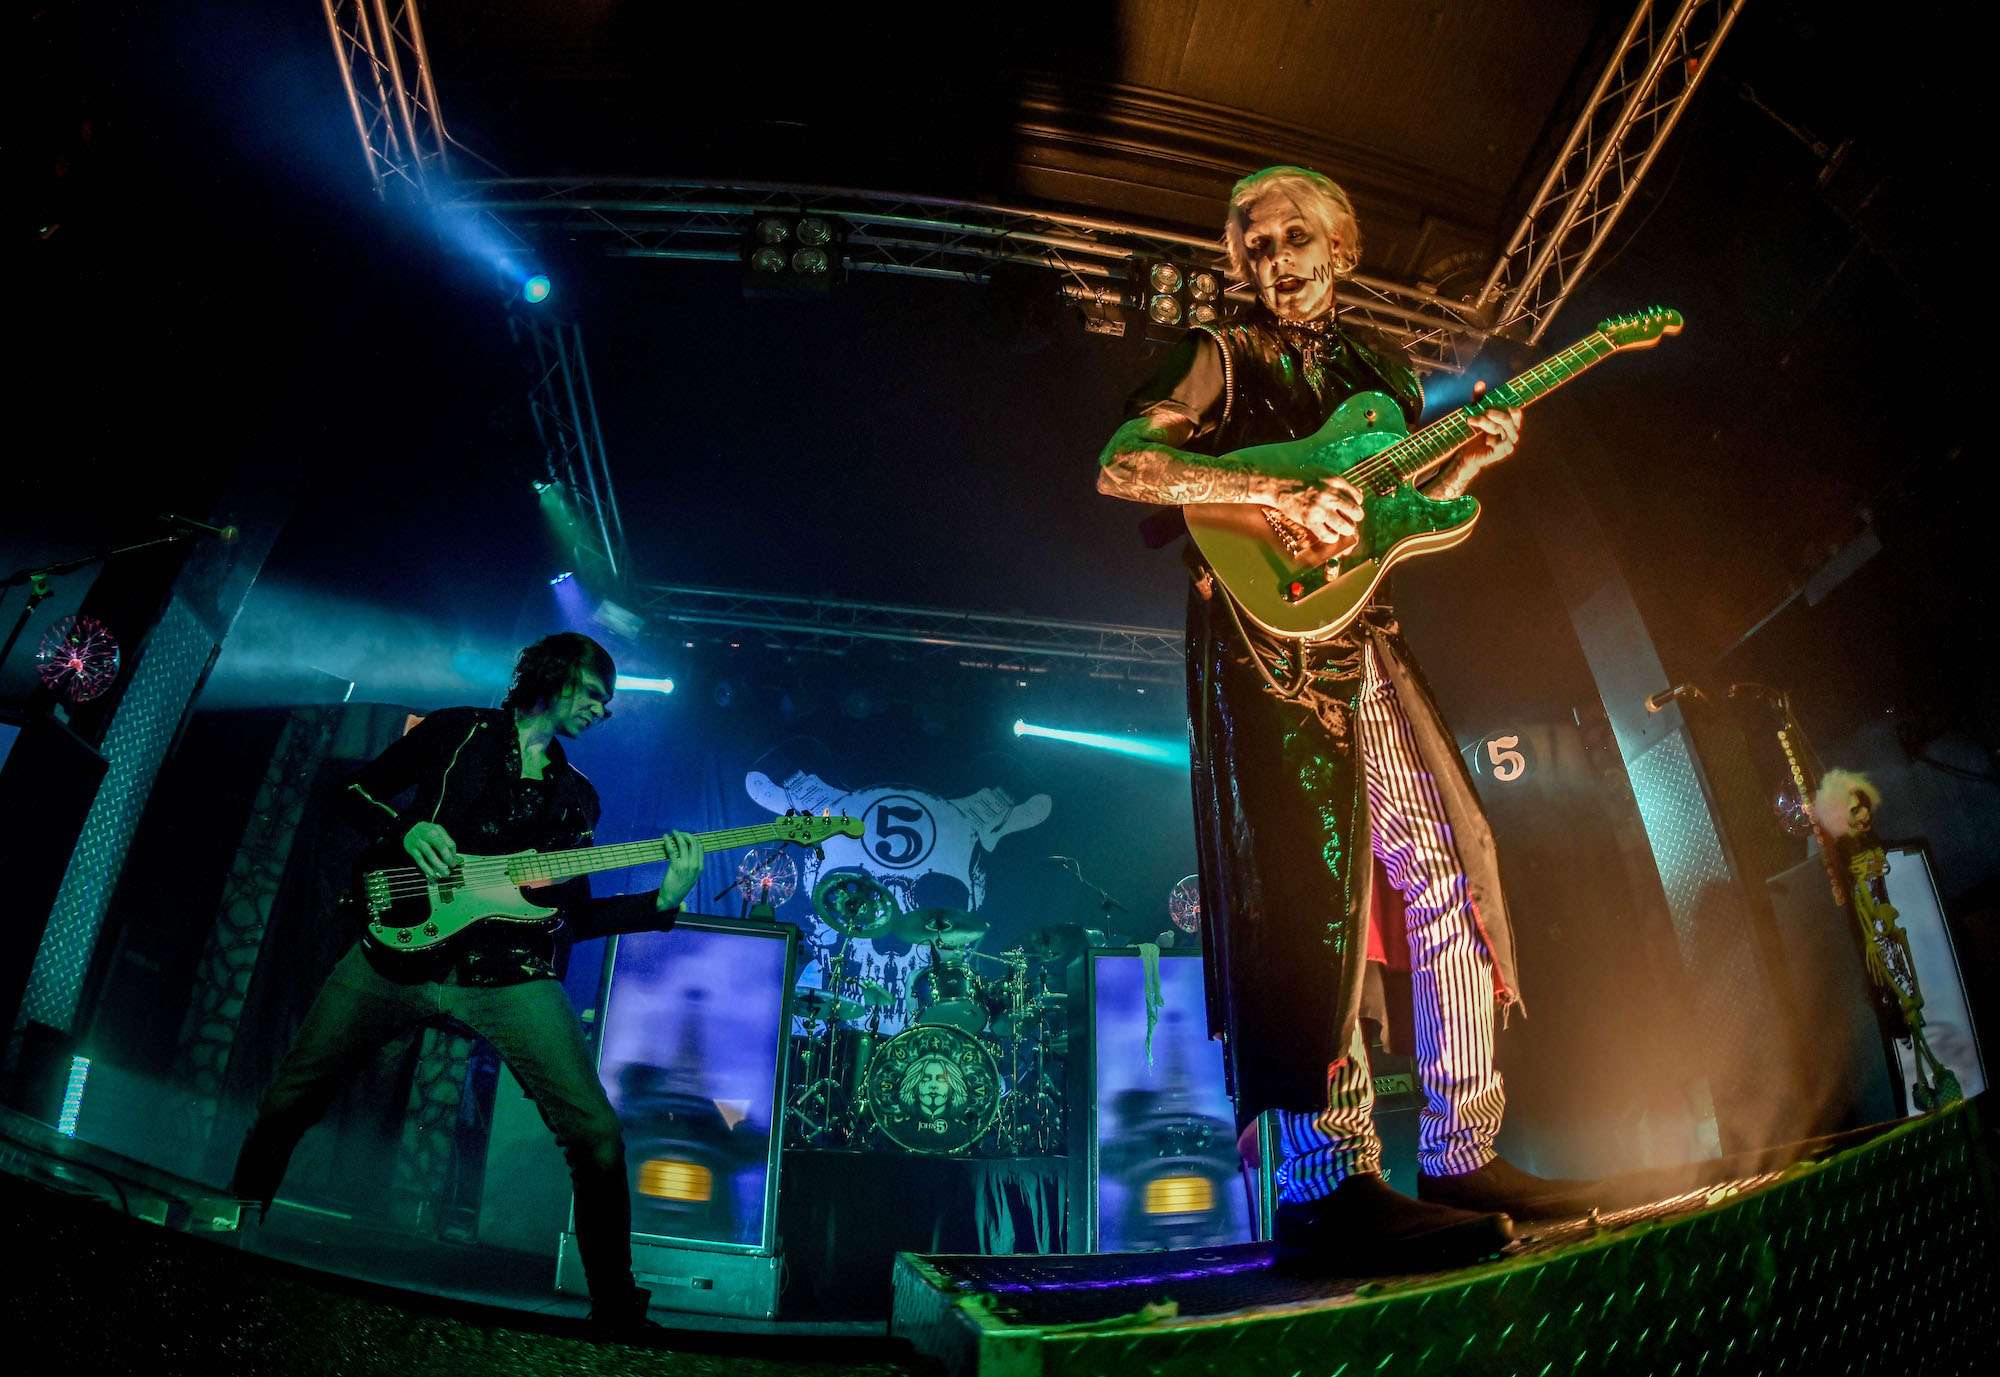 John 5 Live at The Forge [GALLERY] 11